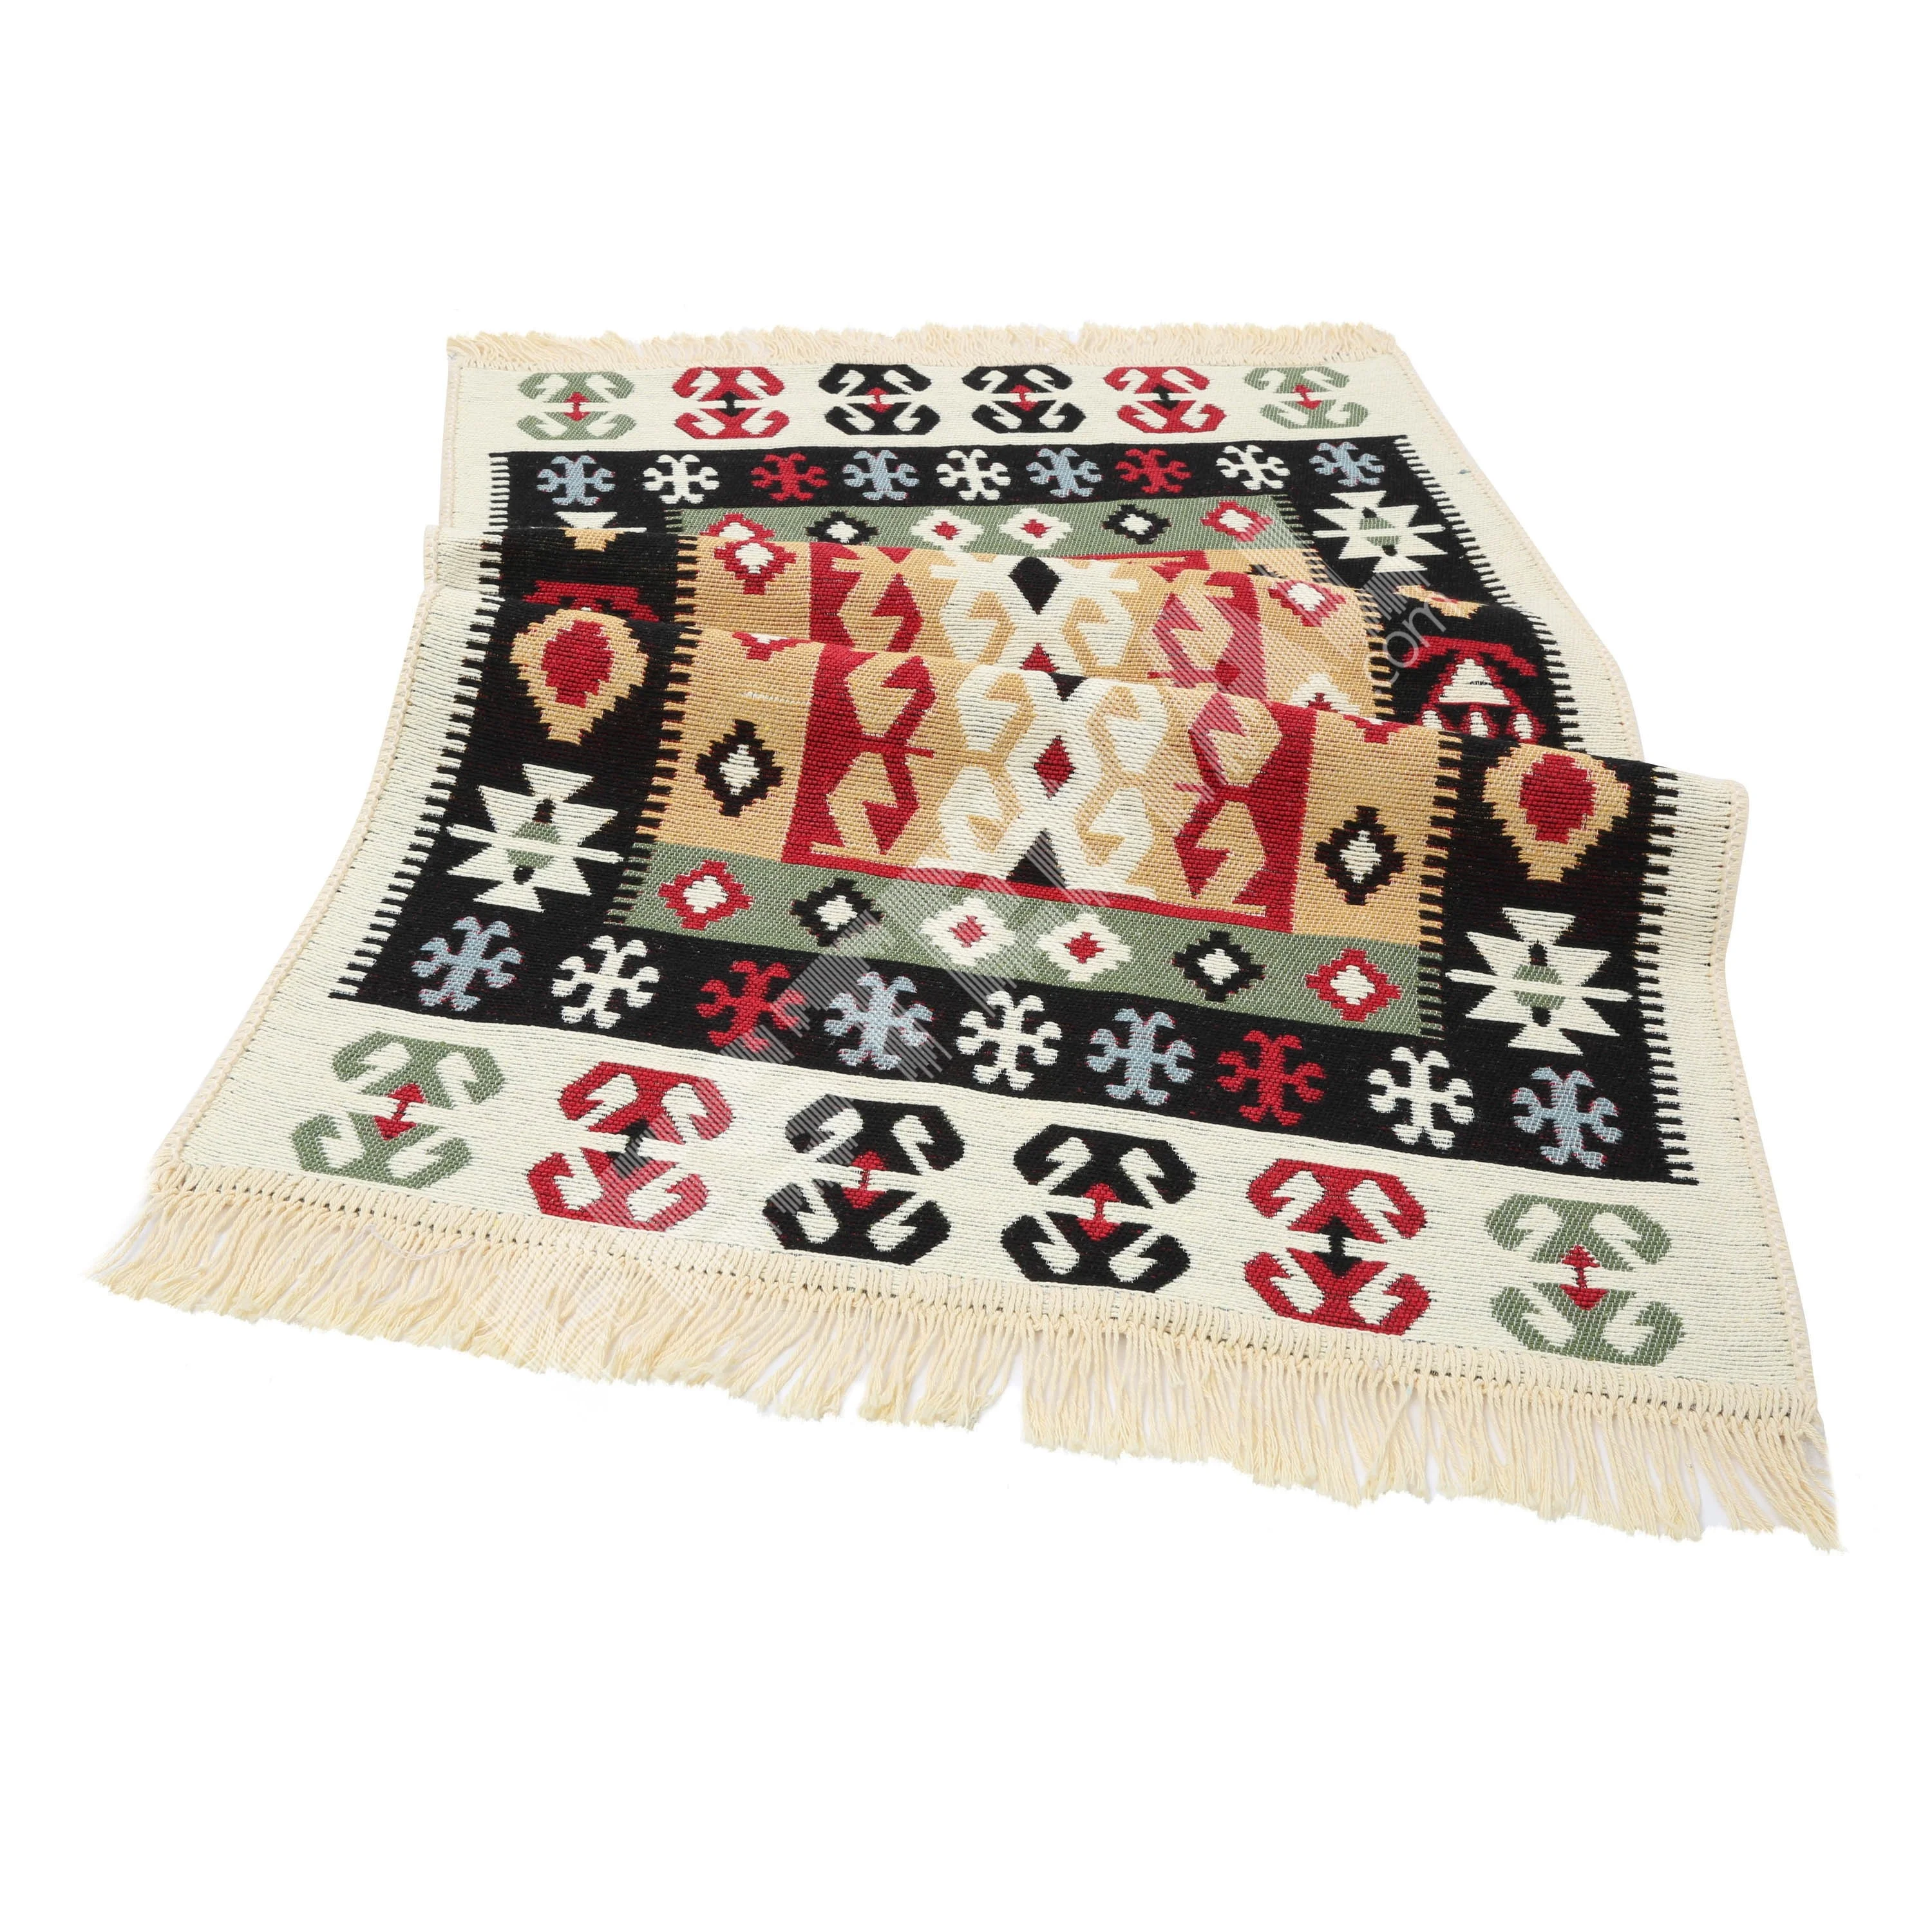 Turkish Hand Woven Special Design Private Label Anti-Slip Rugs and Carpets for Floors with Microfiber Thick Cloth %100 Cotton